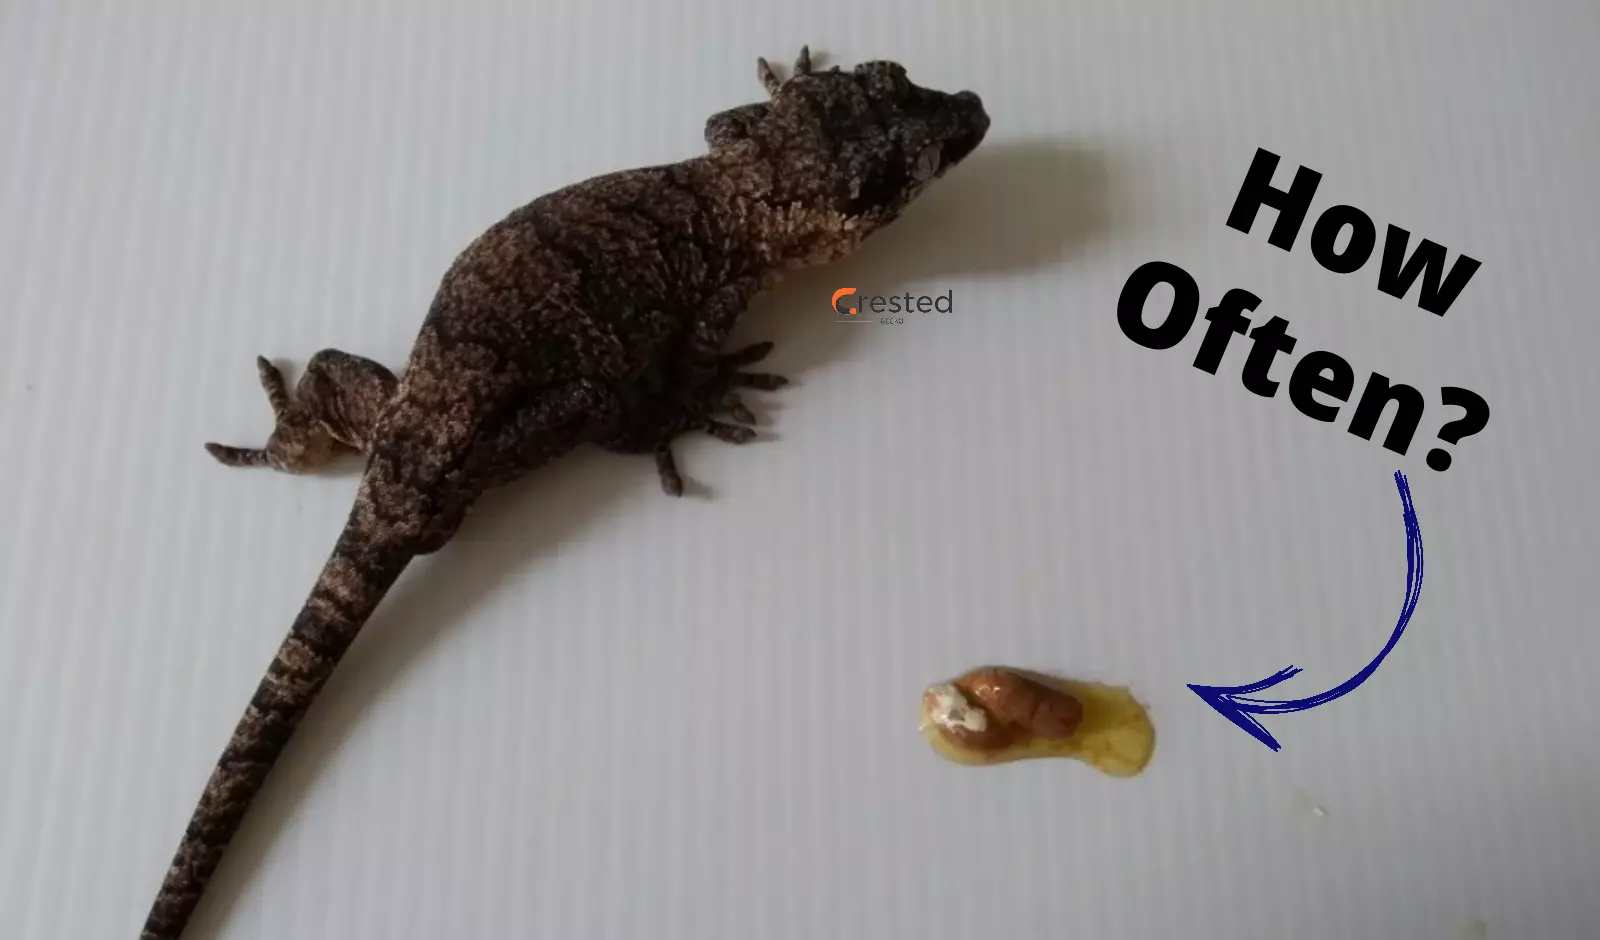 frequency-of-a-crested-gecko-poop